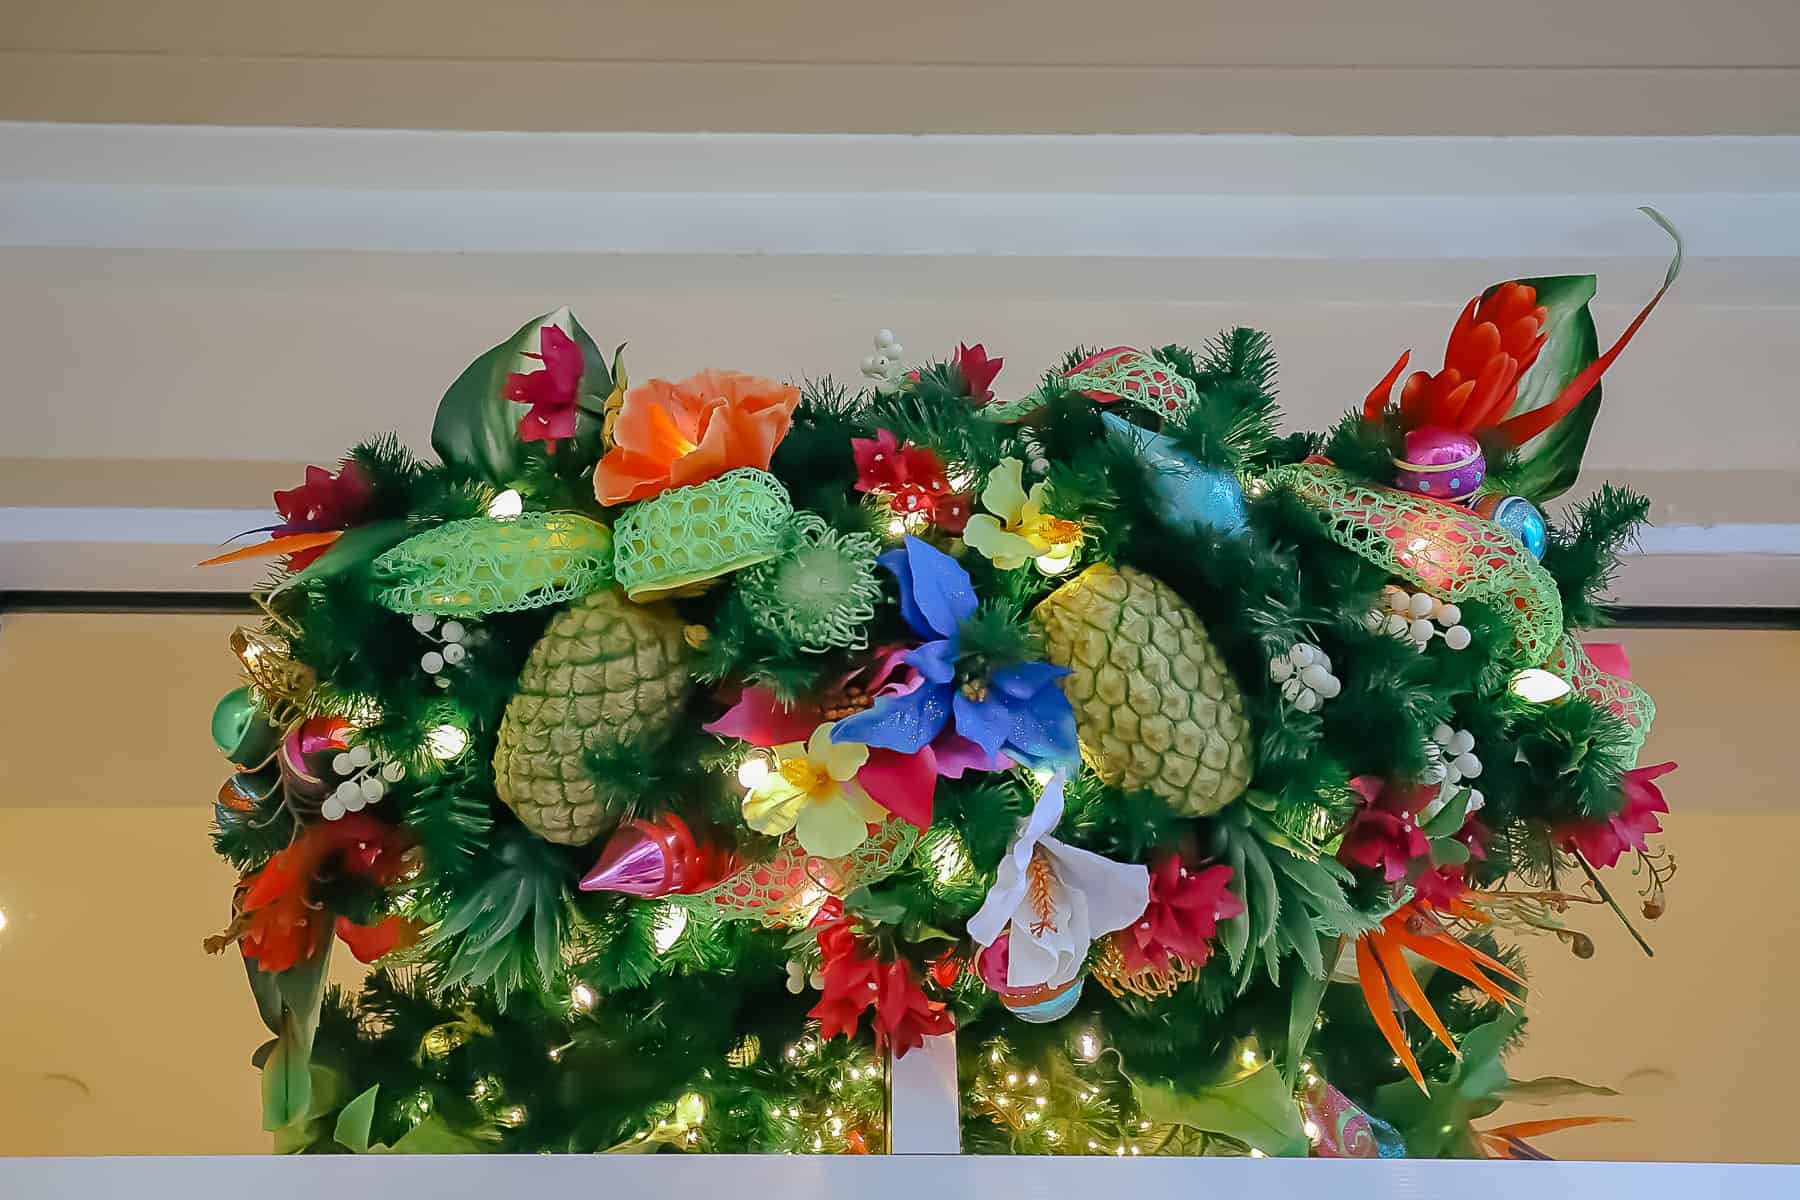 Two pineapples in the holiday decor at Disney's Caribbean Beach.